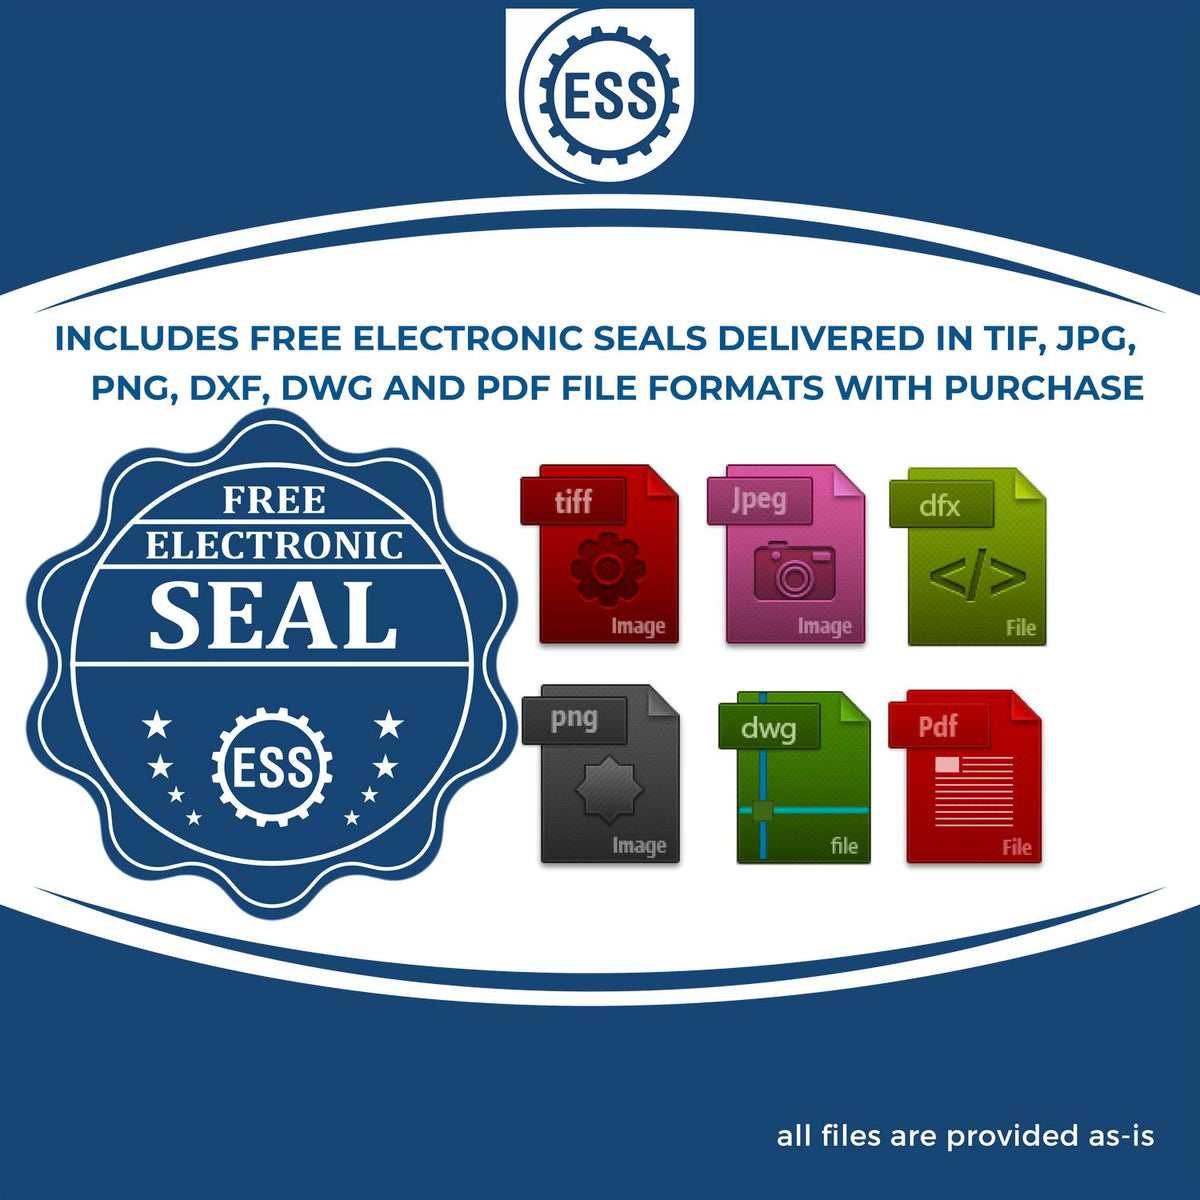 An infographic for the free electronic seal for the Hybrid Delaware Land Surveyor Seal illustrating the different file type icons such as DXF, DWG, TIF, JPG and PNG.